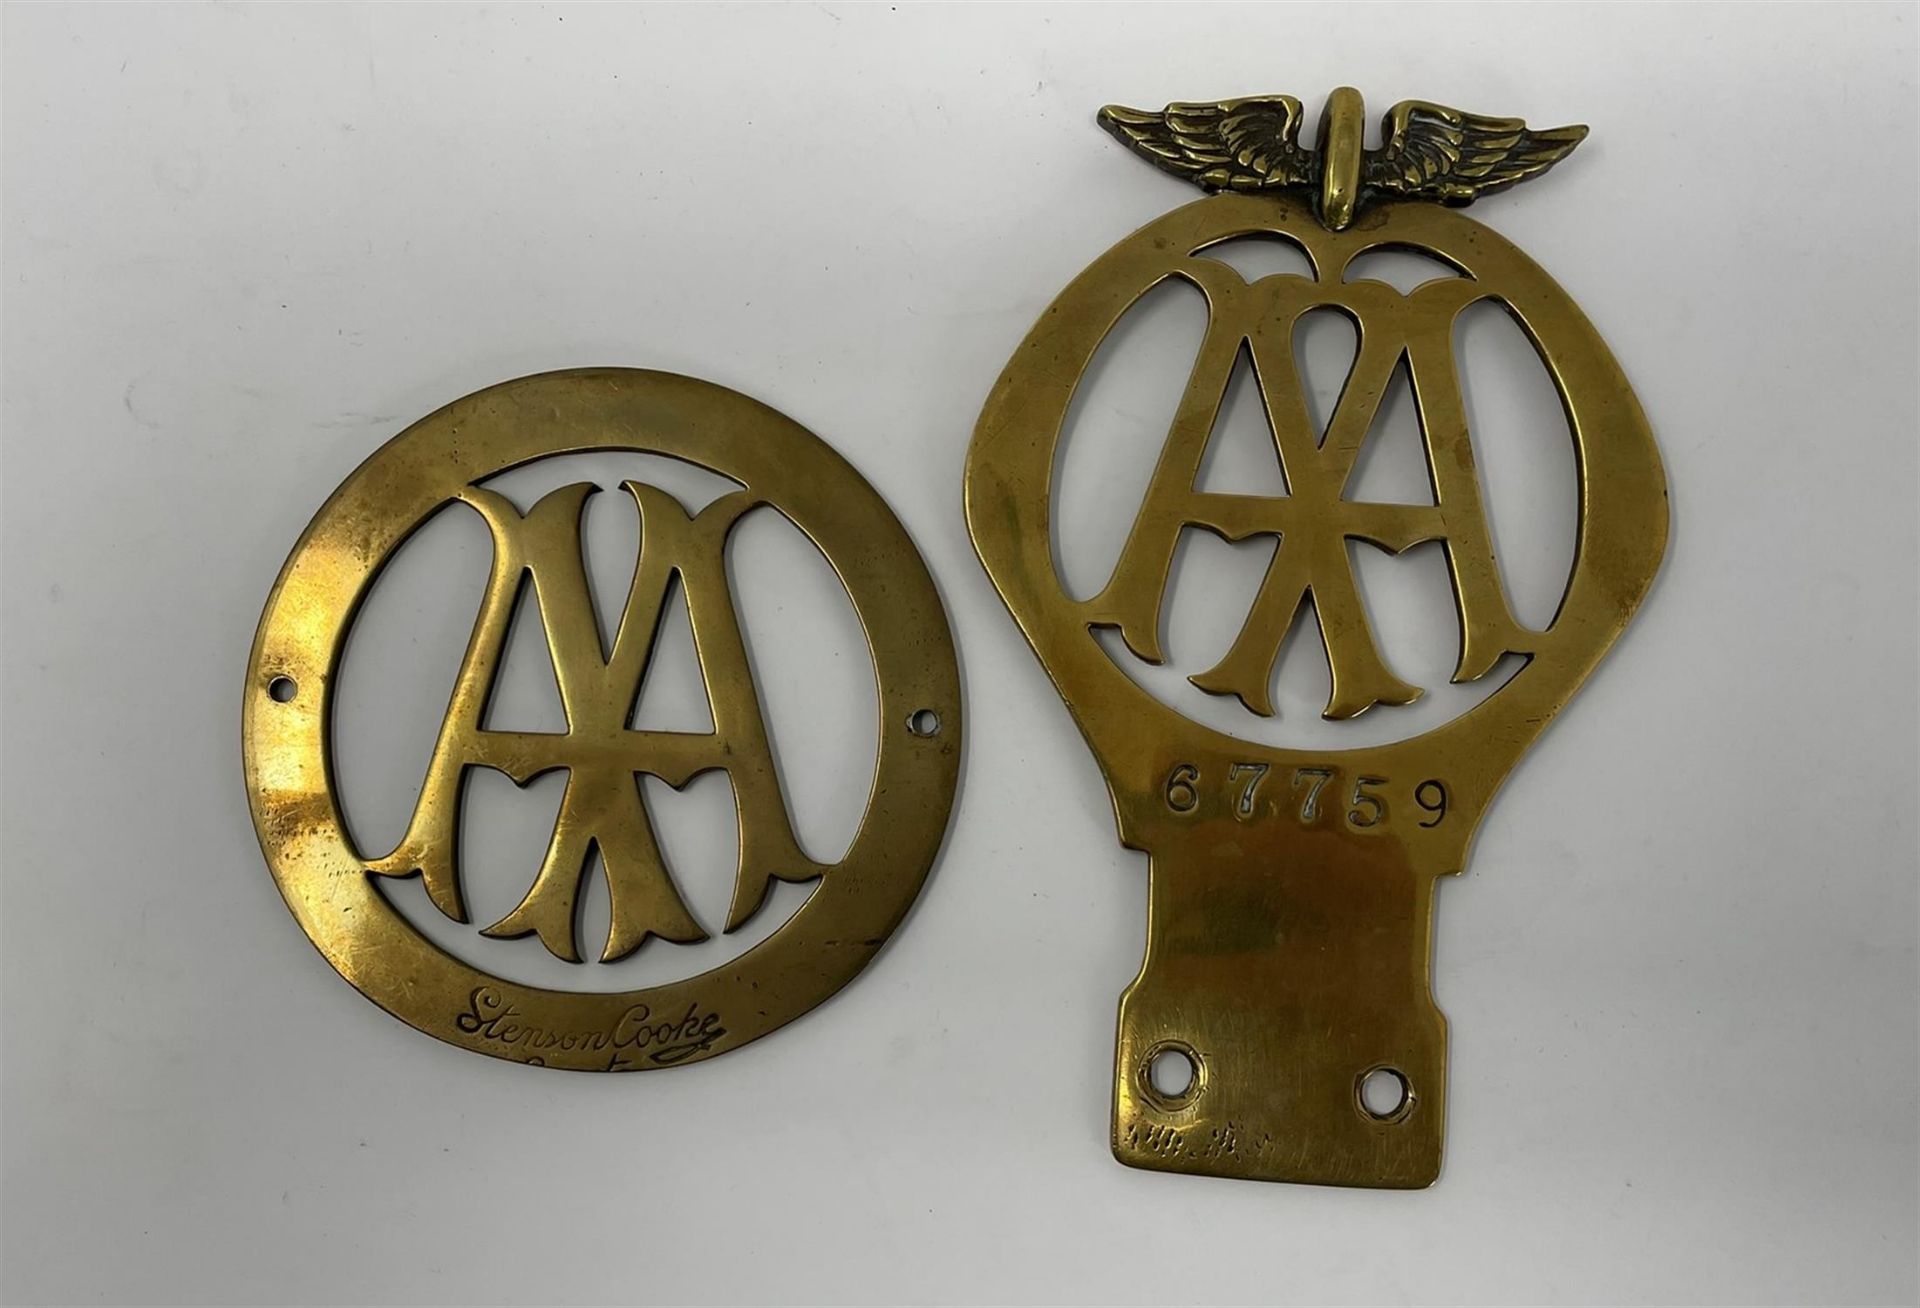 A Fine Pair of Automobile Association Brass Badges - Image 4 of 4